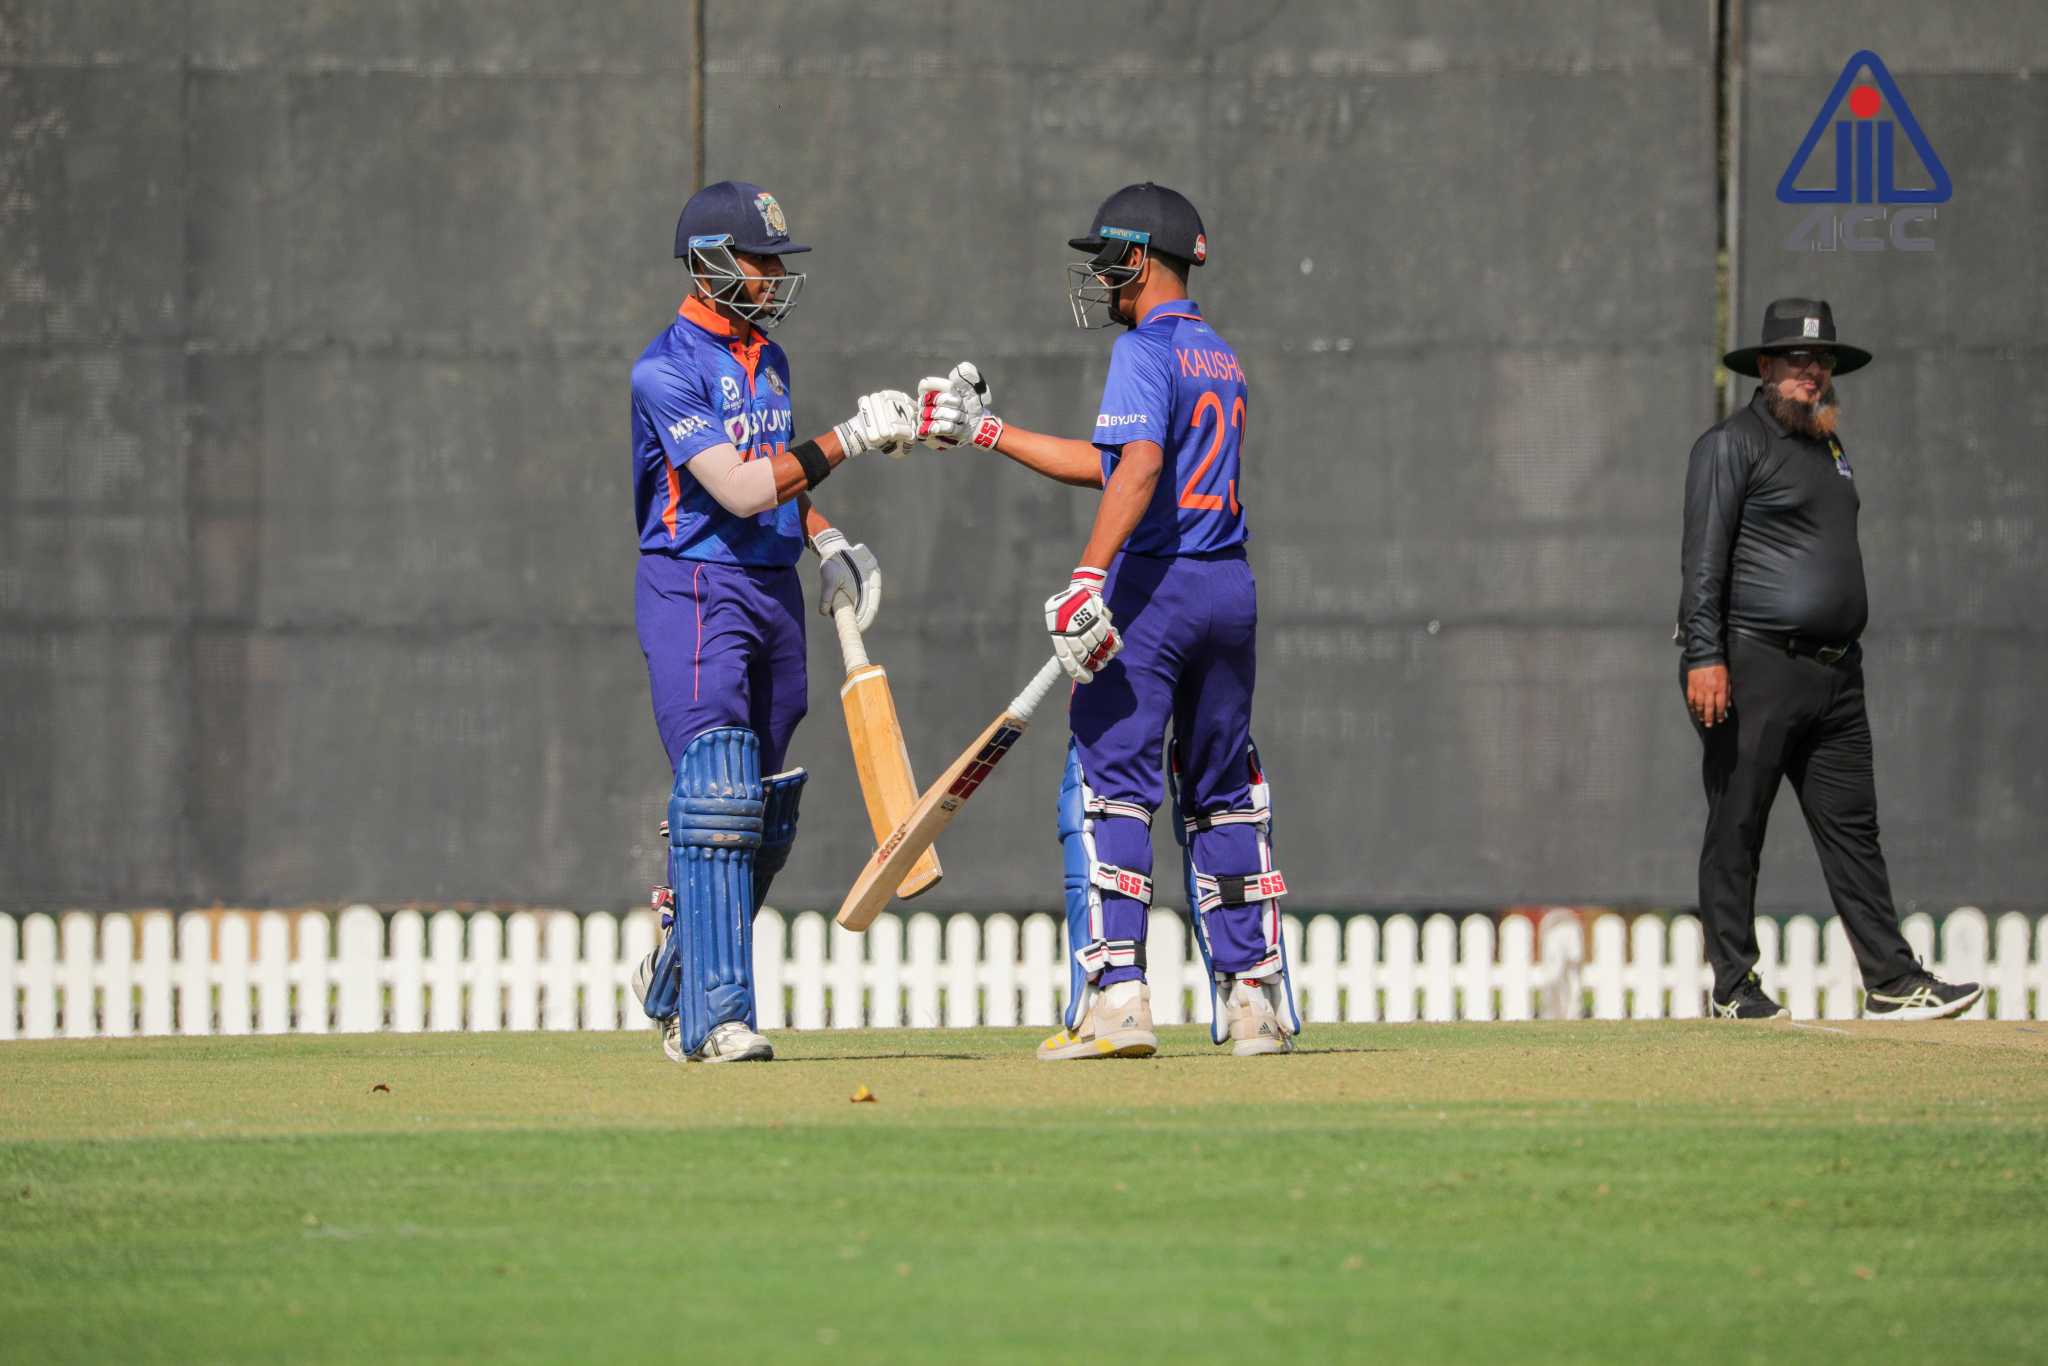 India fan favorites to win the U19 Asia Cup, as eight teams battle for the Asian championship